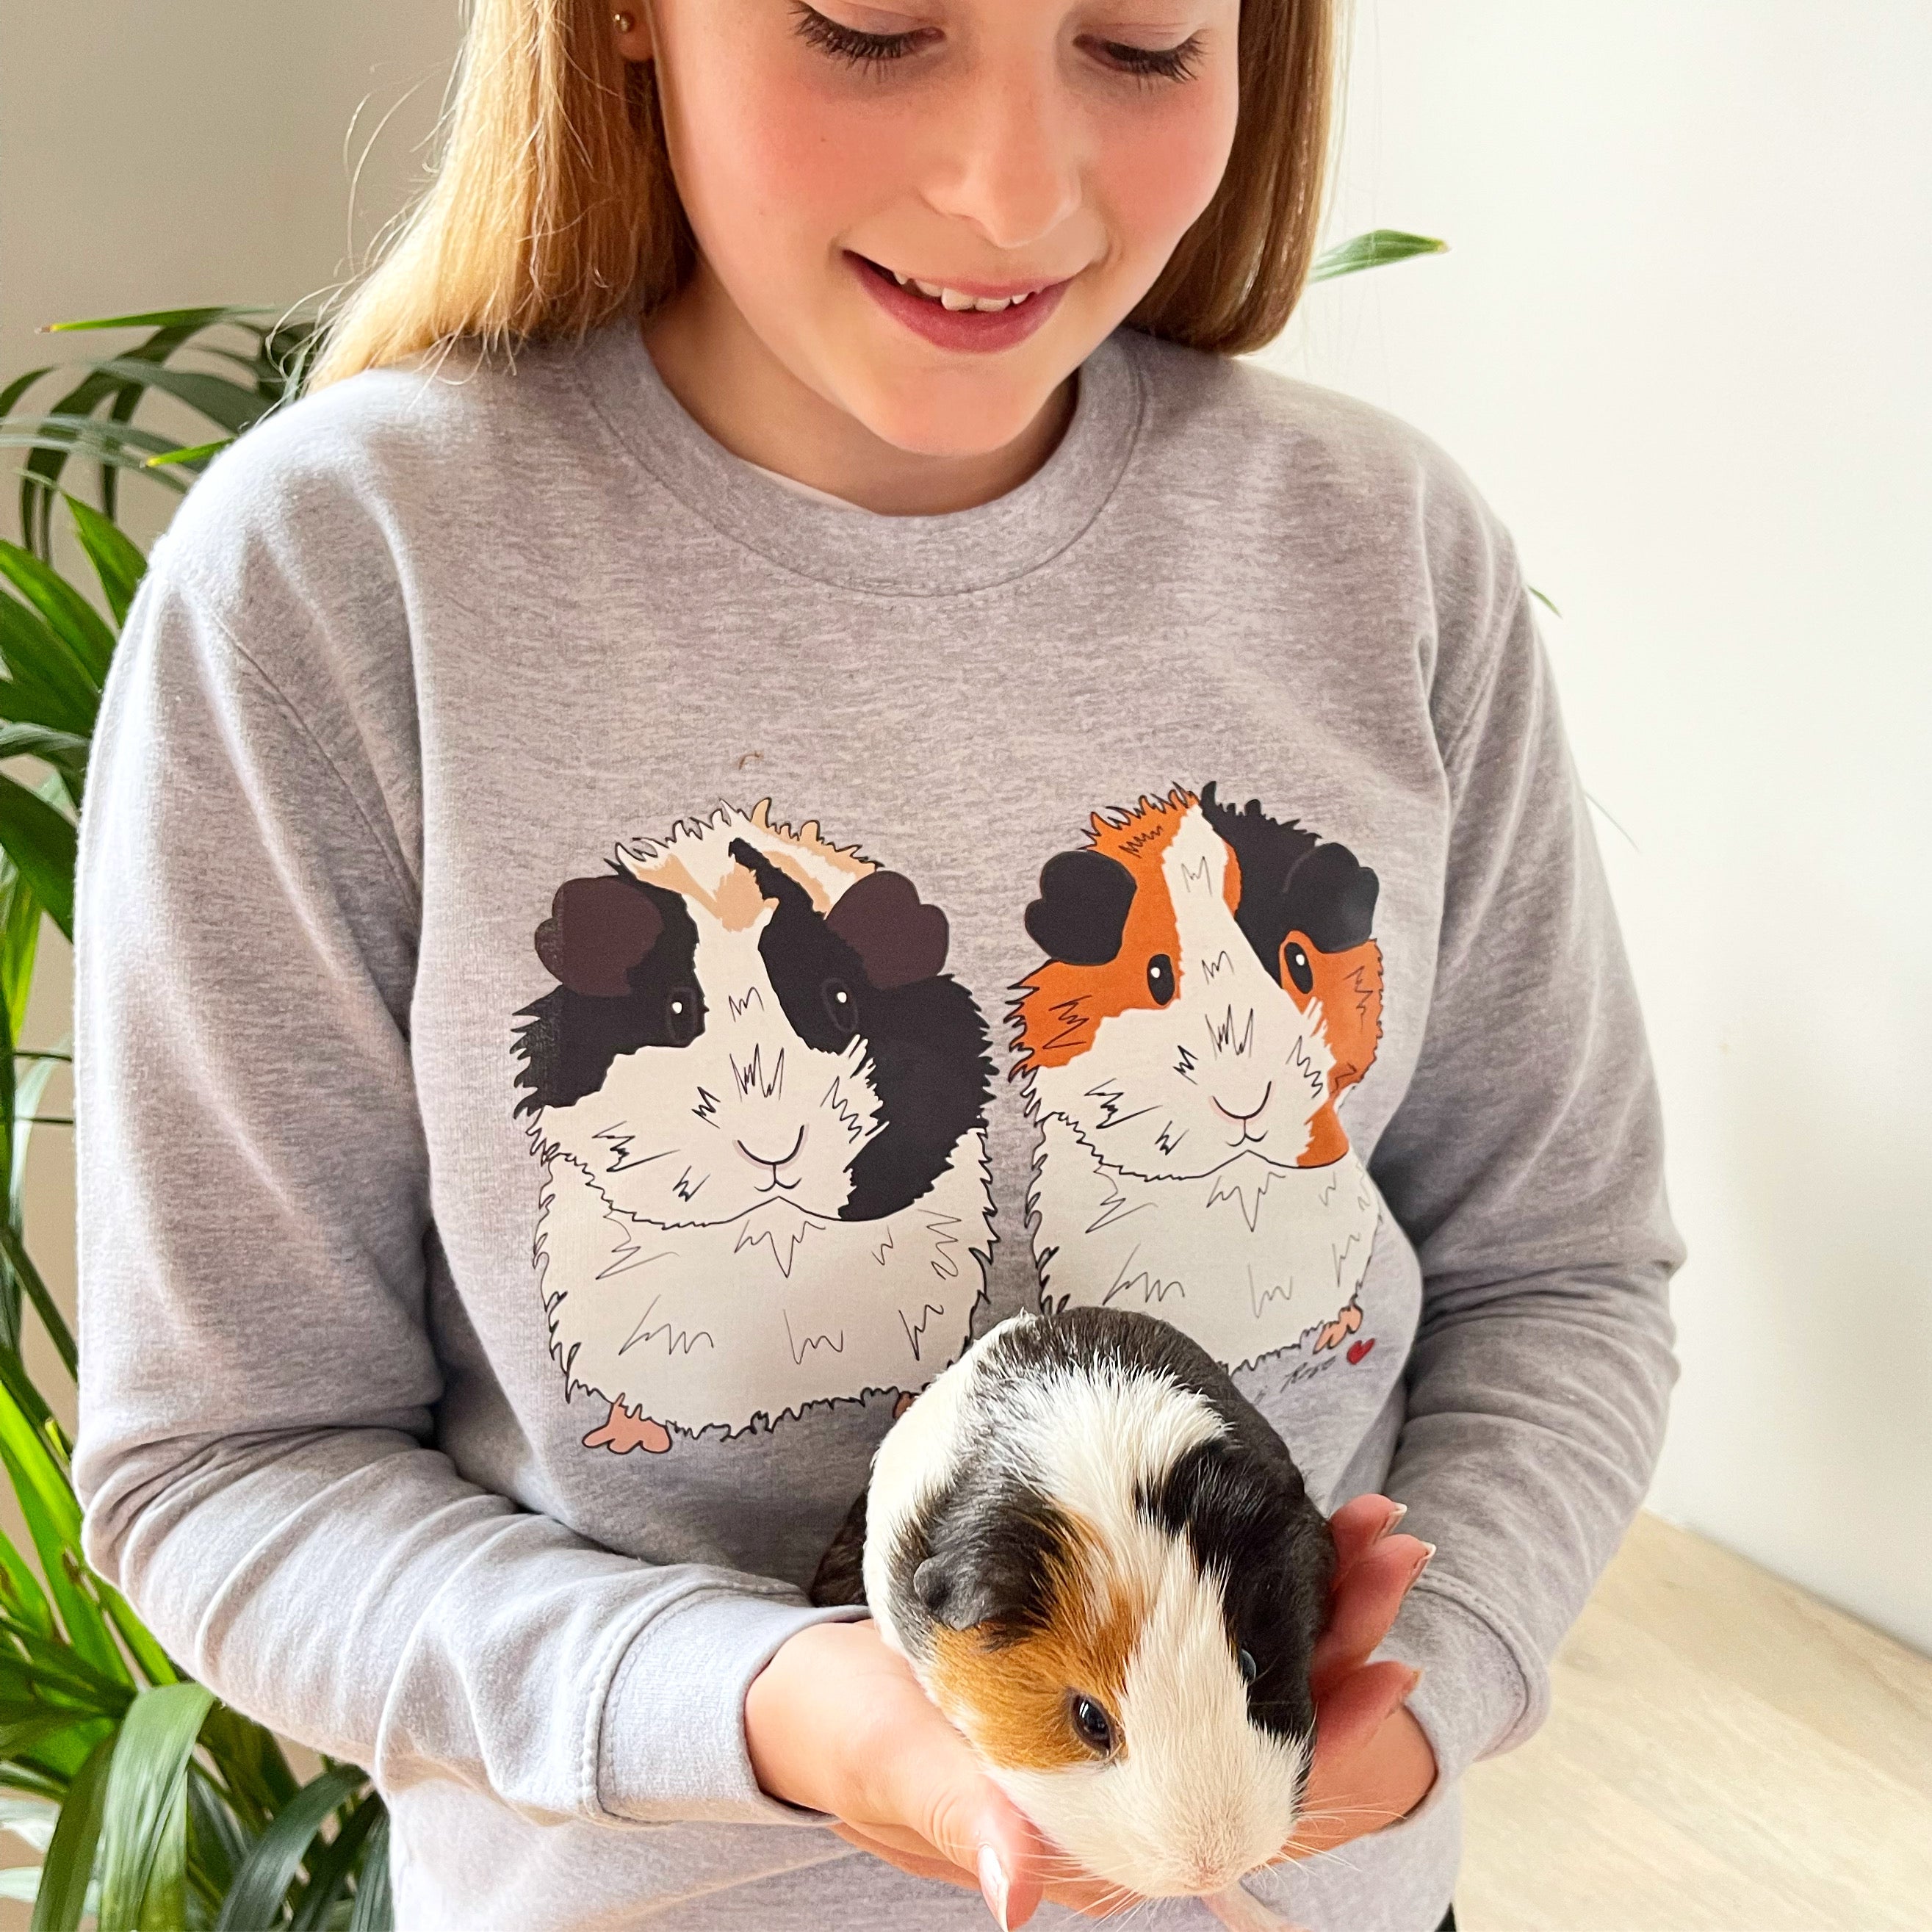 The Personalised Guinea pig Jumper